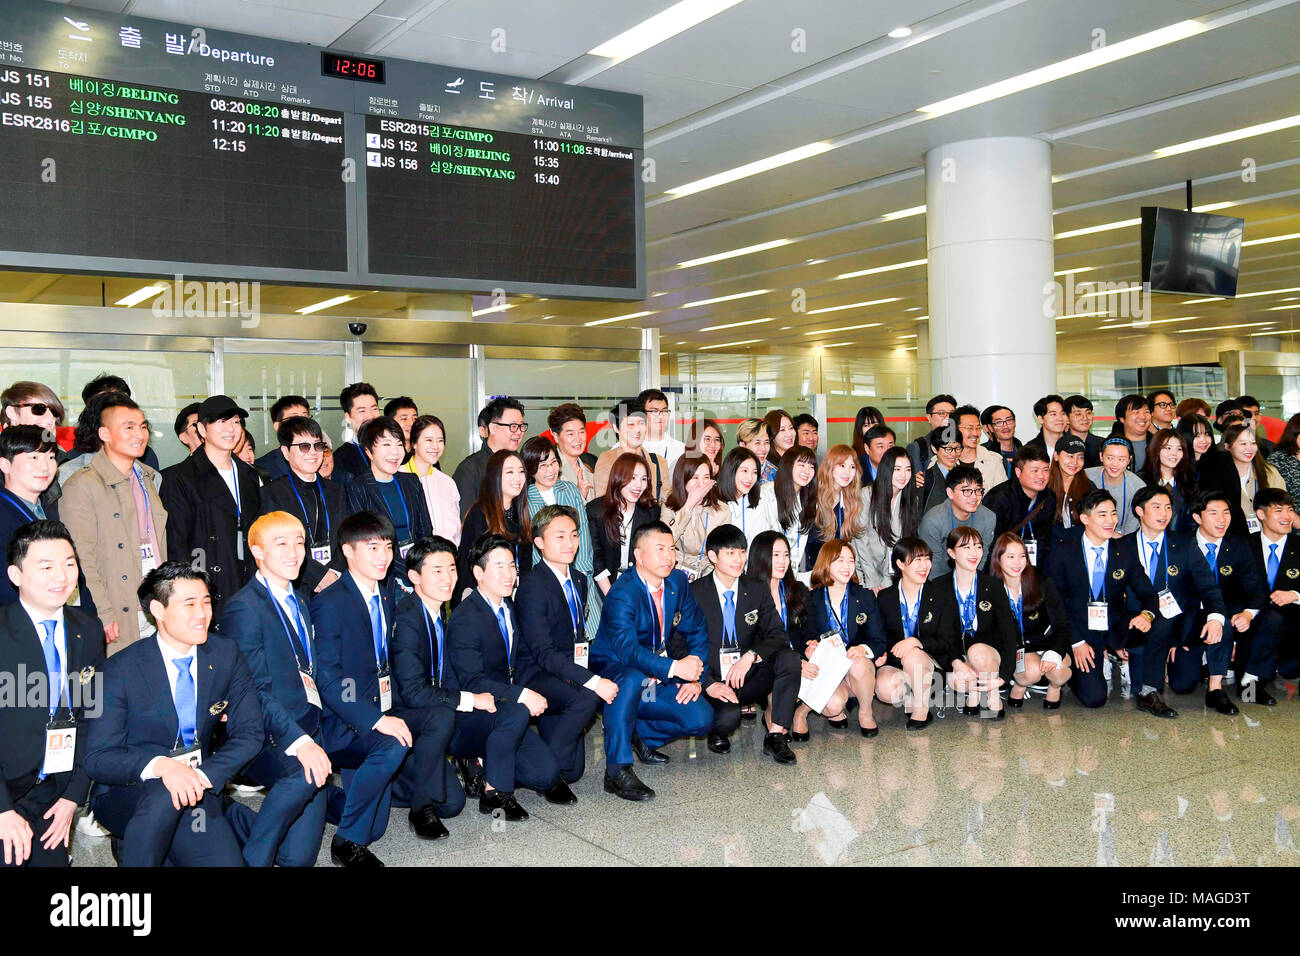 South Korean art troupe and taekwondo athletes in Pyongyang, Mar 31, 2018 : South Korean art troupe and taekwondo athletes pose for photos upon their arrival at Sunan airport in Pyongyang, North Korea. South Korean taekwondo athletes and K-Pop musicians such as Cho Yong-pil, Lee Sun-hee, Choi Jin-hee, Yoon Do-hyun (YB), Baek Ji-young, Red Velvet, Jungin, Seohyun (Girls' Generation), Ali, Kang San-eh and Kim Kwang-min will perform at the East Pyongyang Grand Theater on Sunday and will perform in a joint concert with North Korean artists on Tuesday at the Ryugyong Jong Ju Yong Gymnasium in Pyong Stock Photo